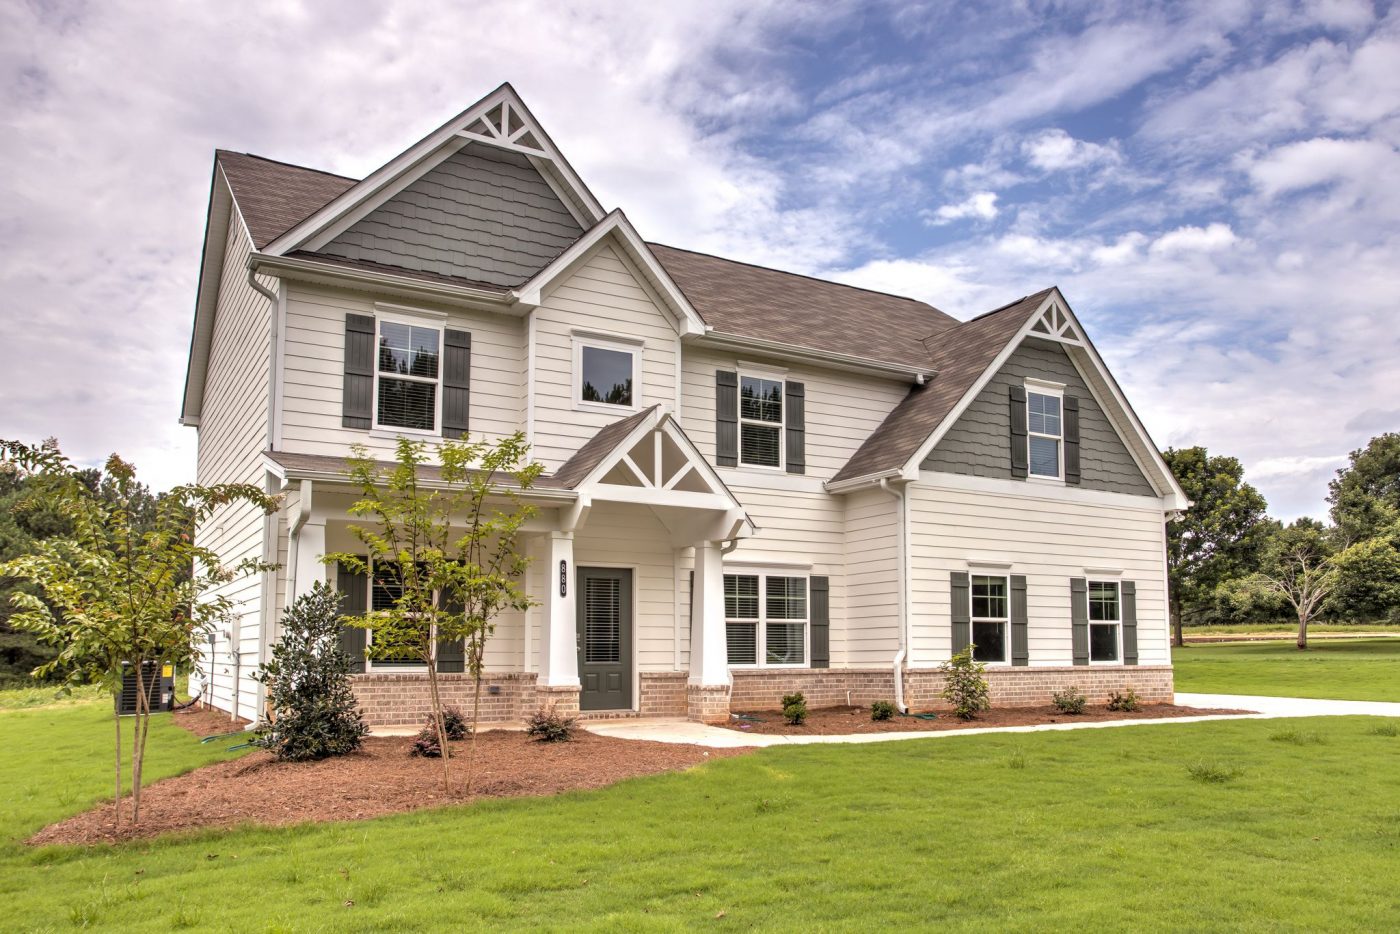 A new home in Pineview Estates